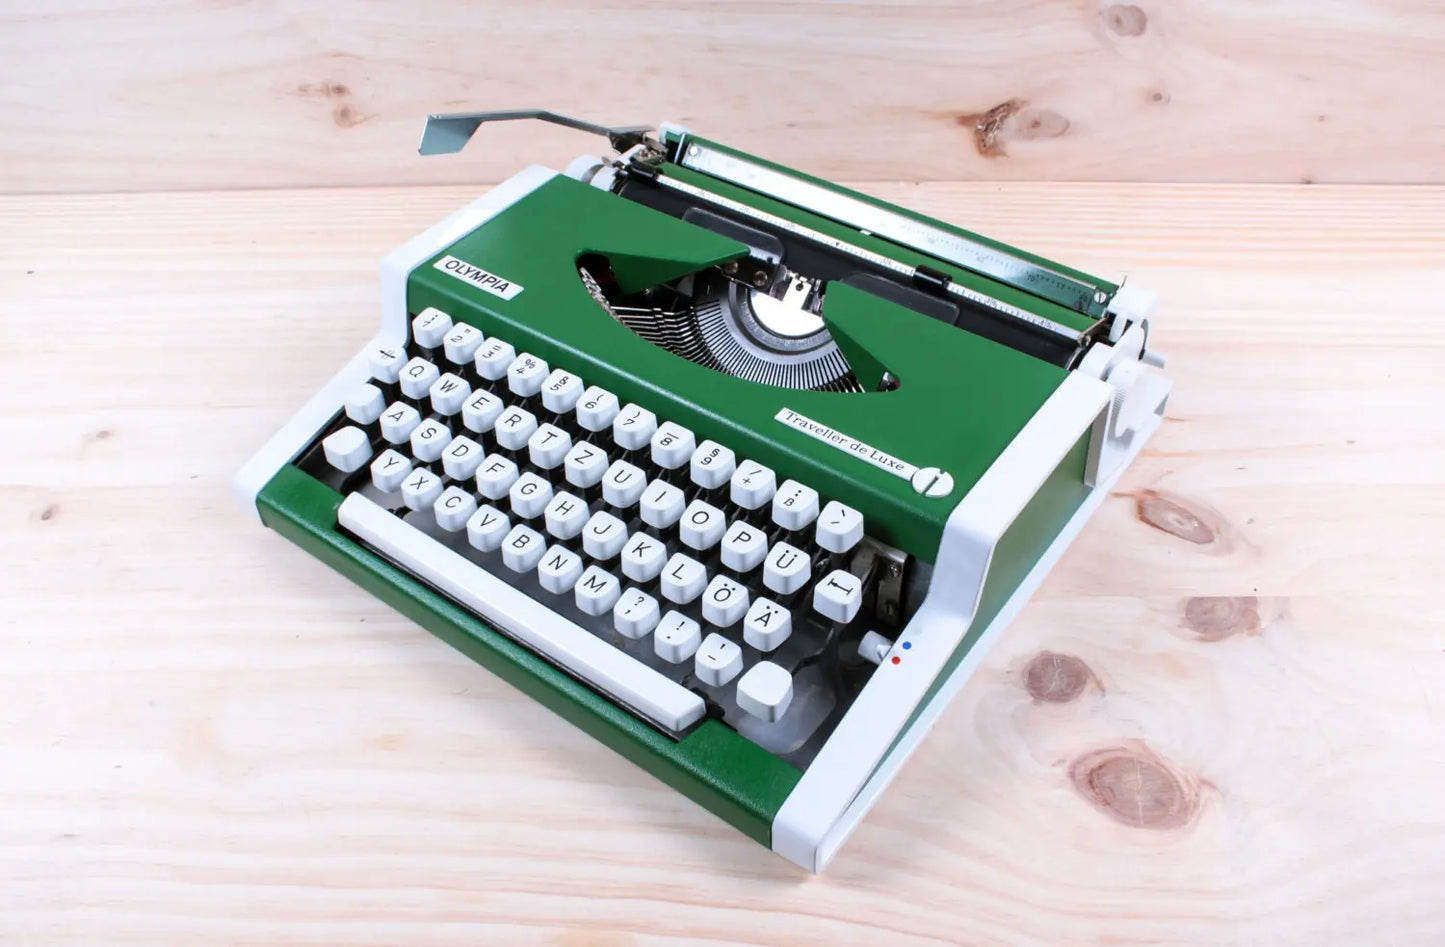 Olympia Traveller De Luxe Green Typewriter, Vintage, Manual Portable, Professionally Serviced by Typewriter.Company - ElGranero Typewriter.Company